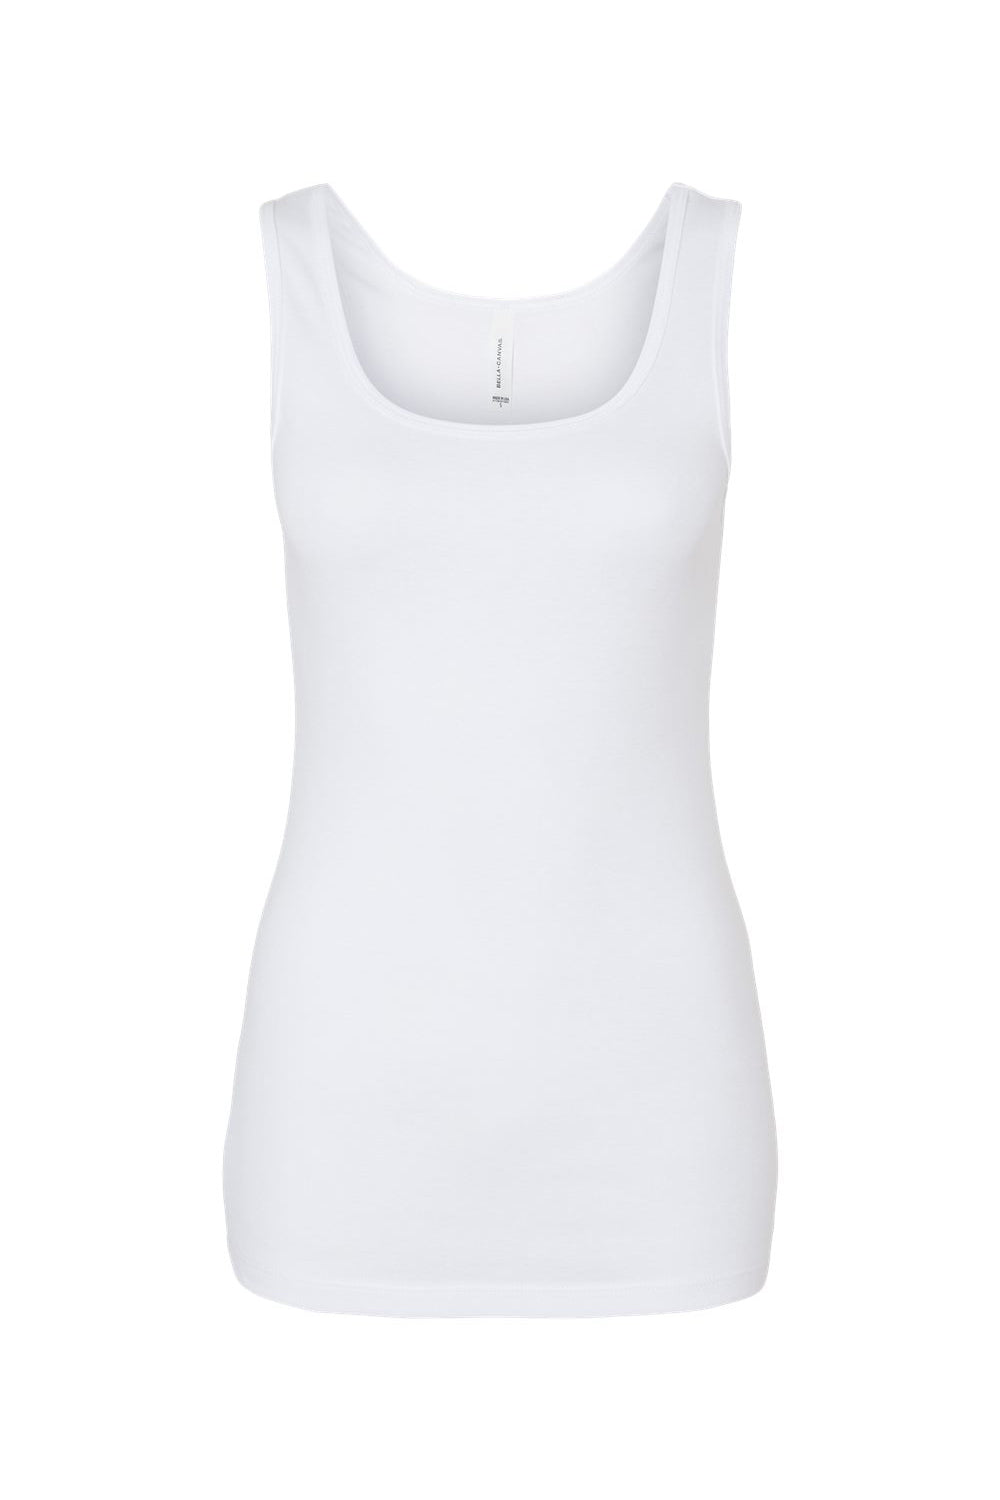 Bella + Canvas 1081 Womens Micro Ribbed Tank Top White Flat Front